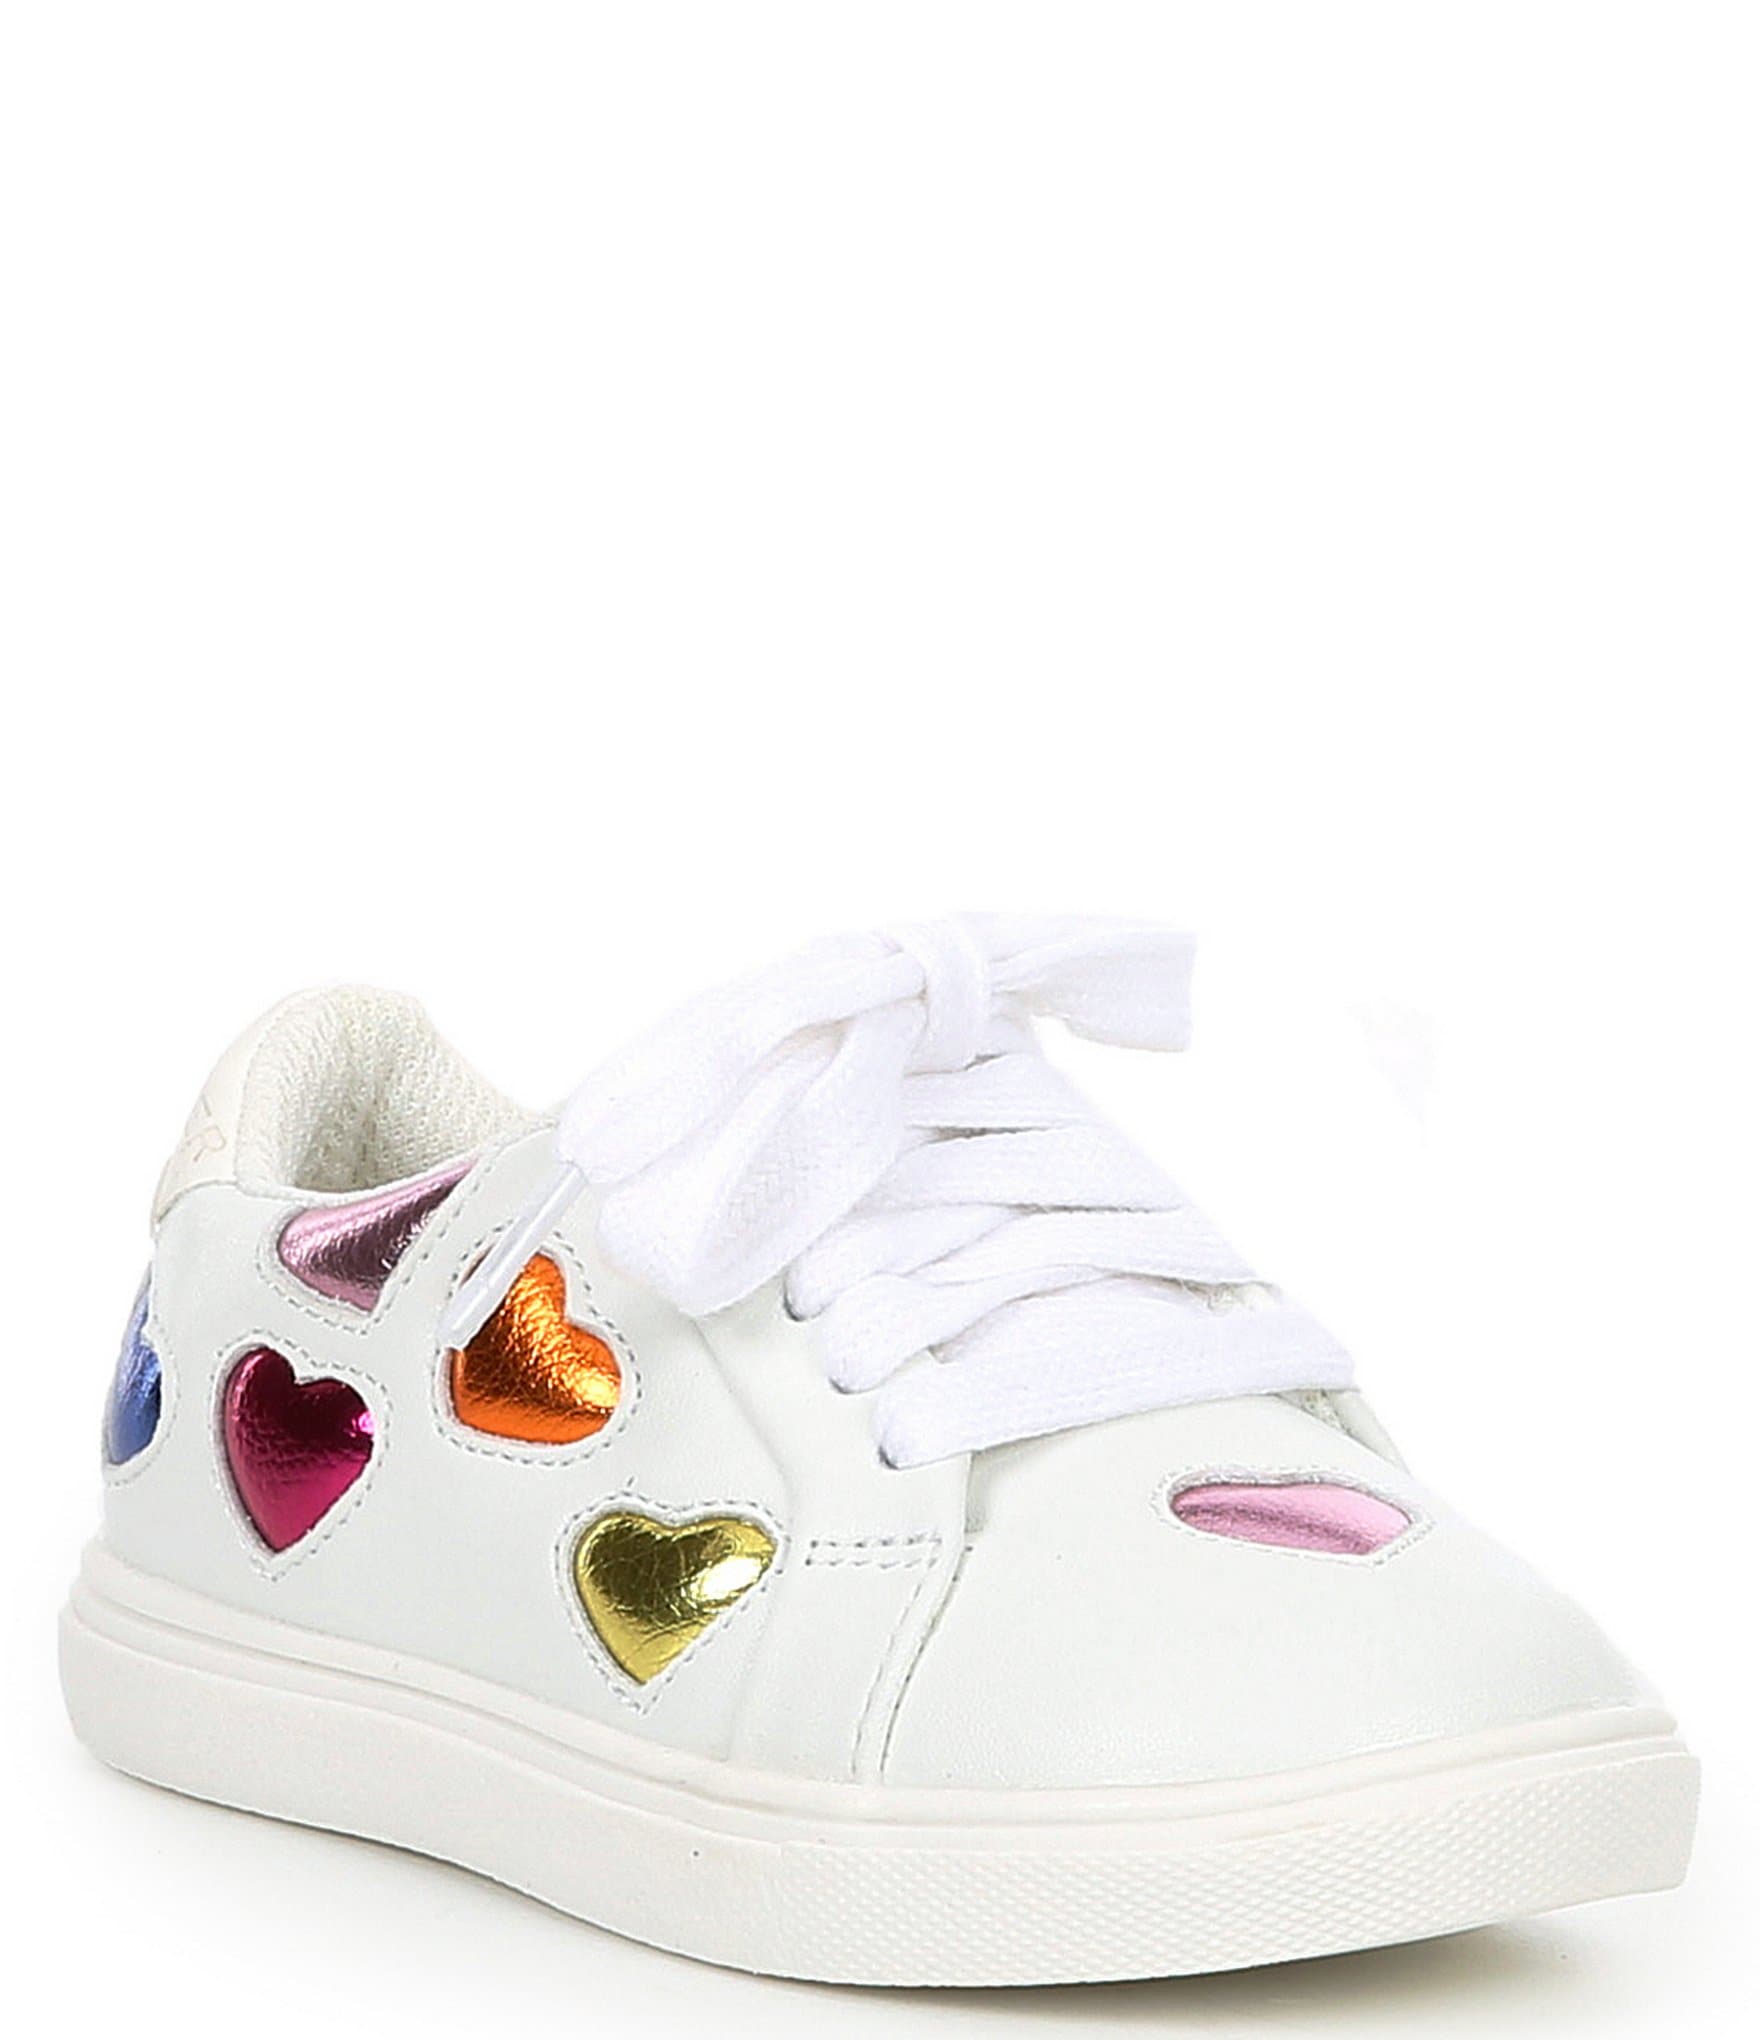 Kurt Geiger London Girls' Mini Love Leather Lace-Up Sneakers (Infant ...